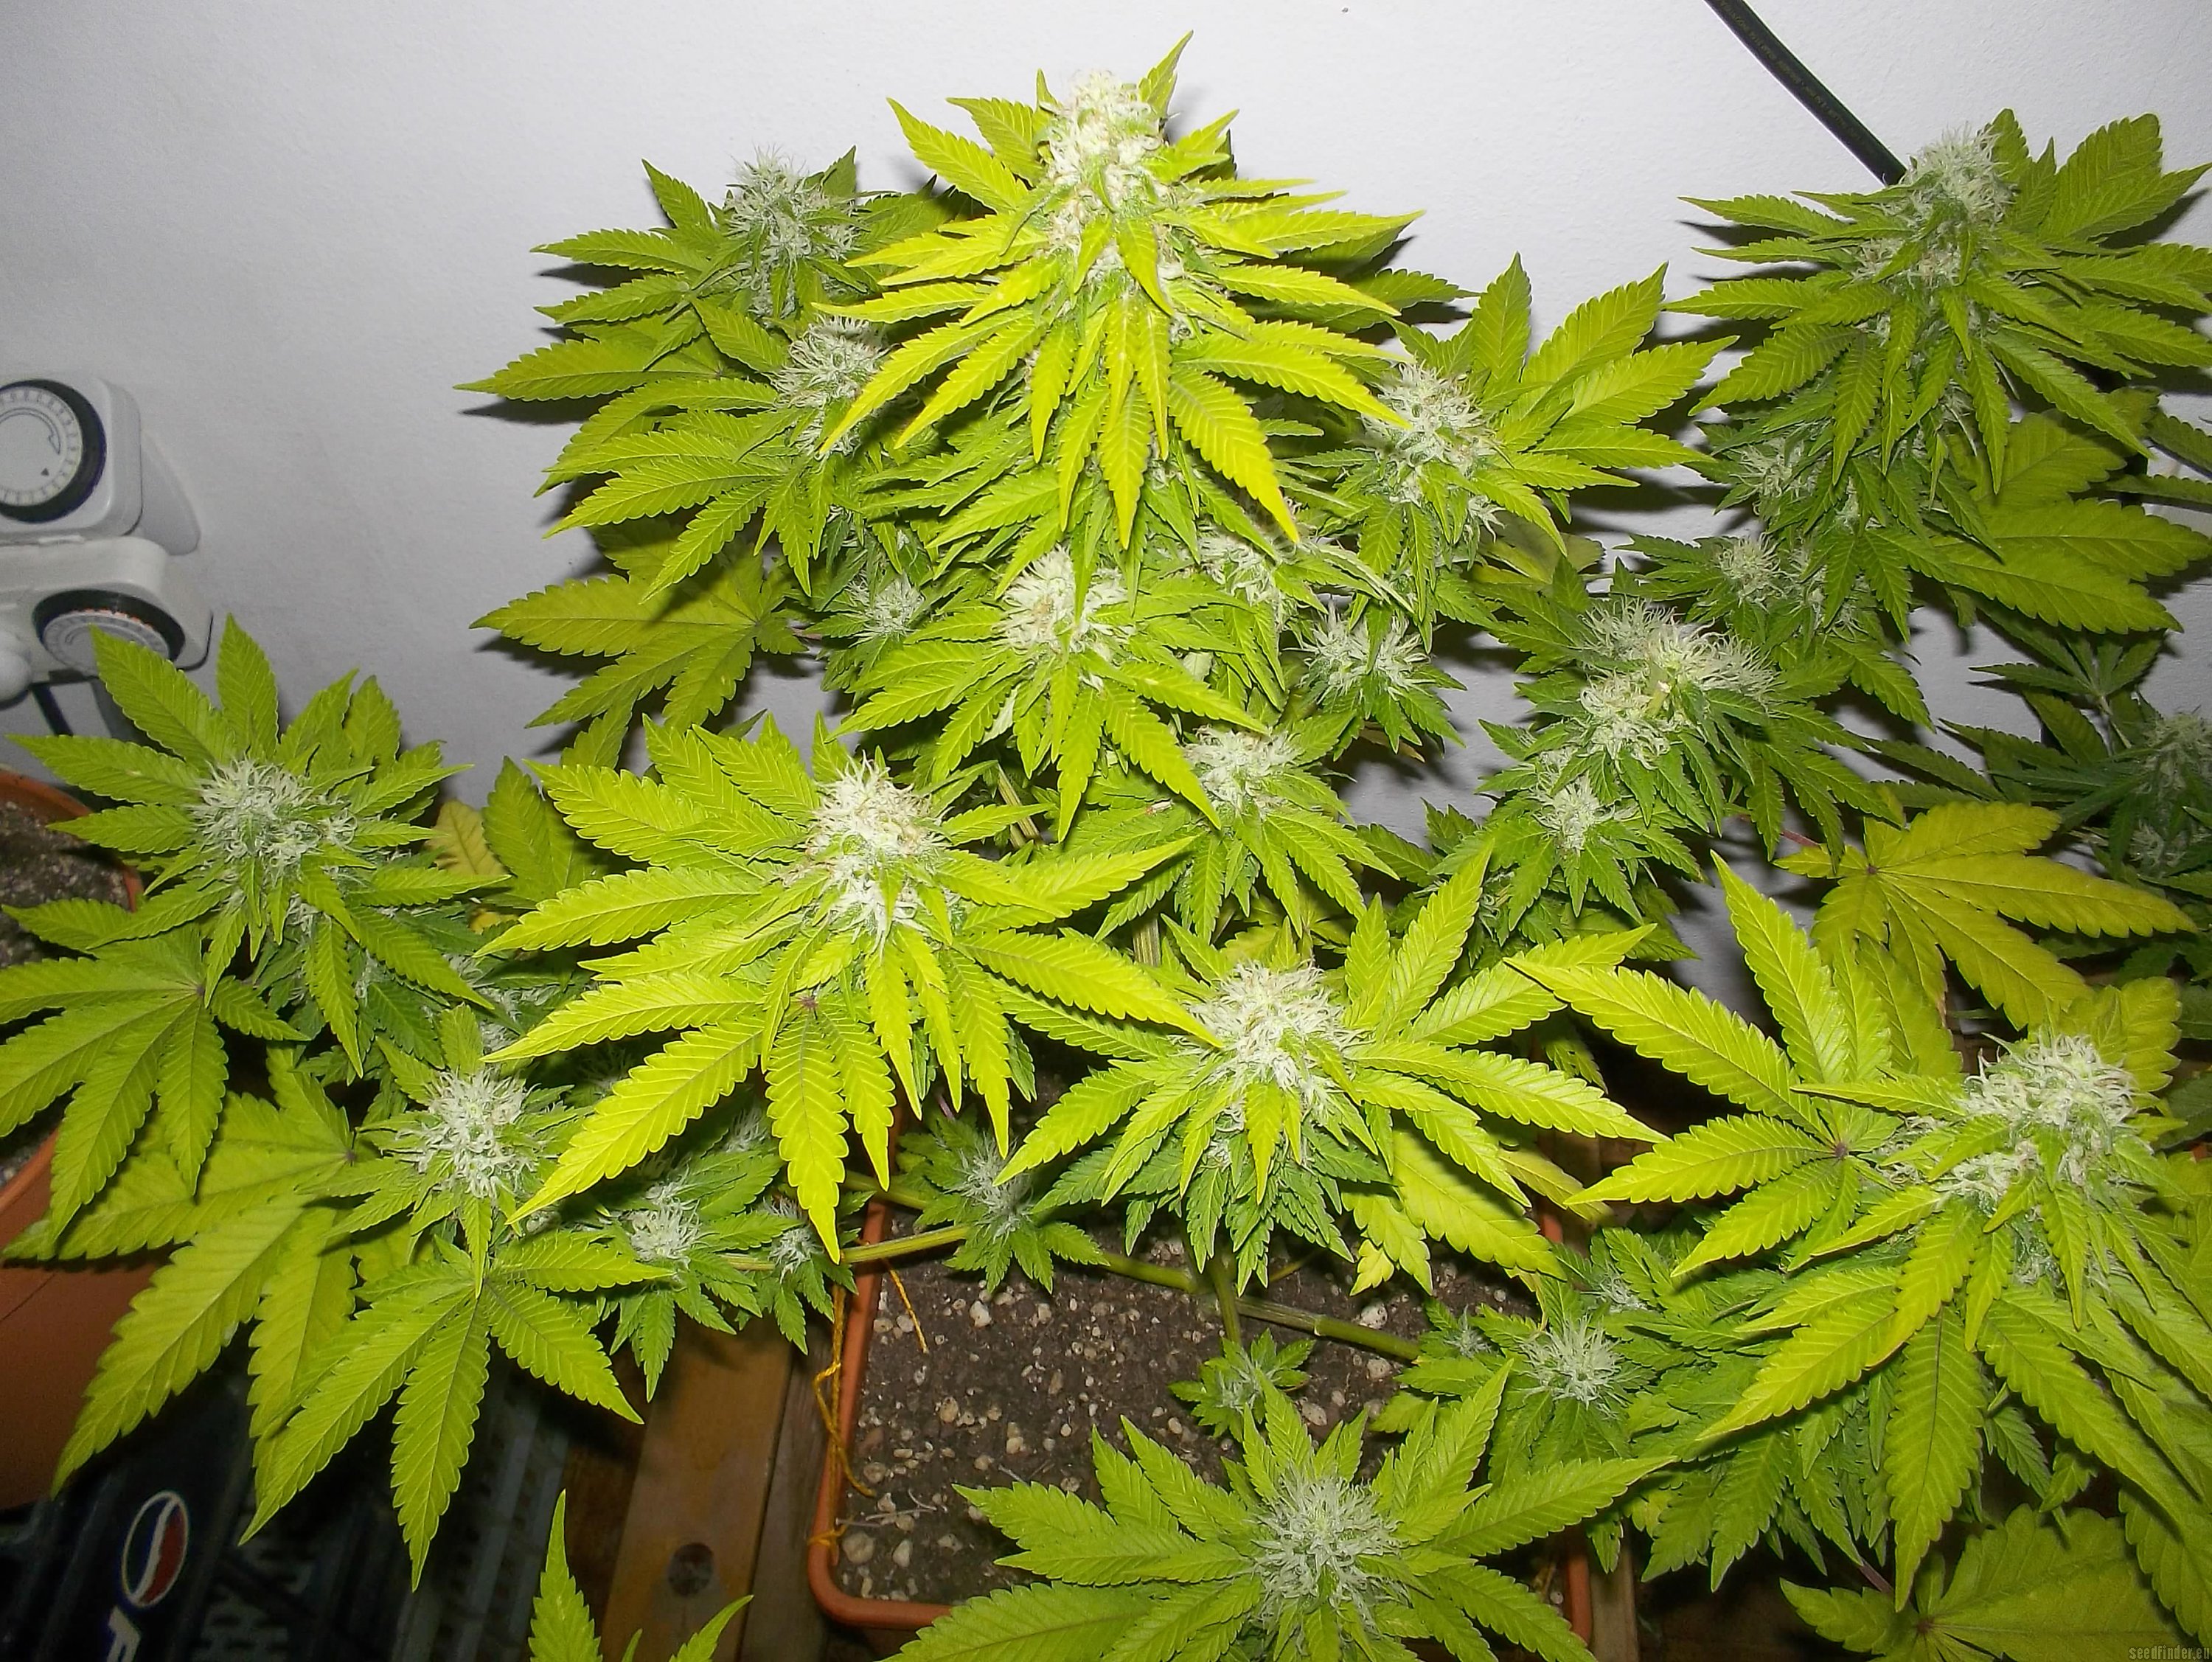 Royal Queen Seeds Royal Moby